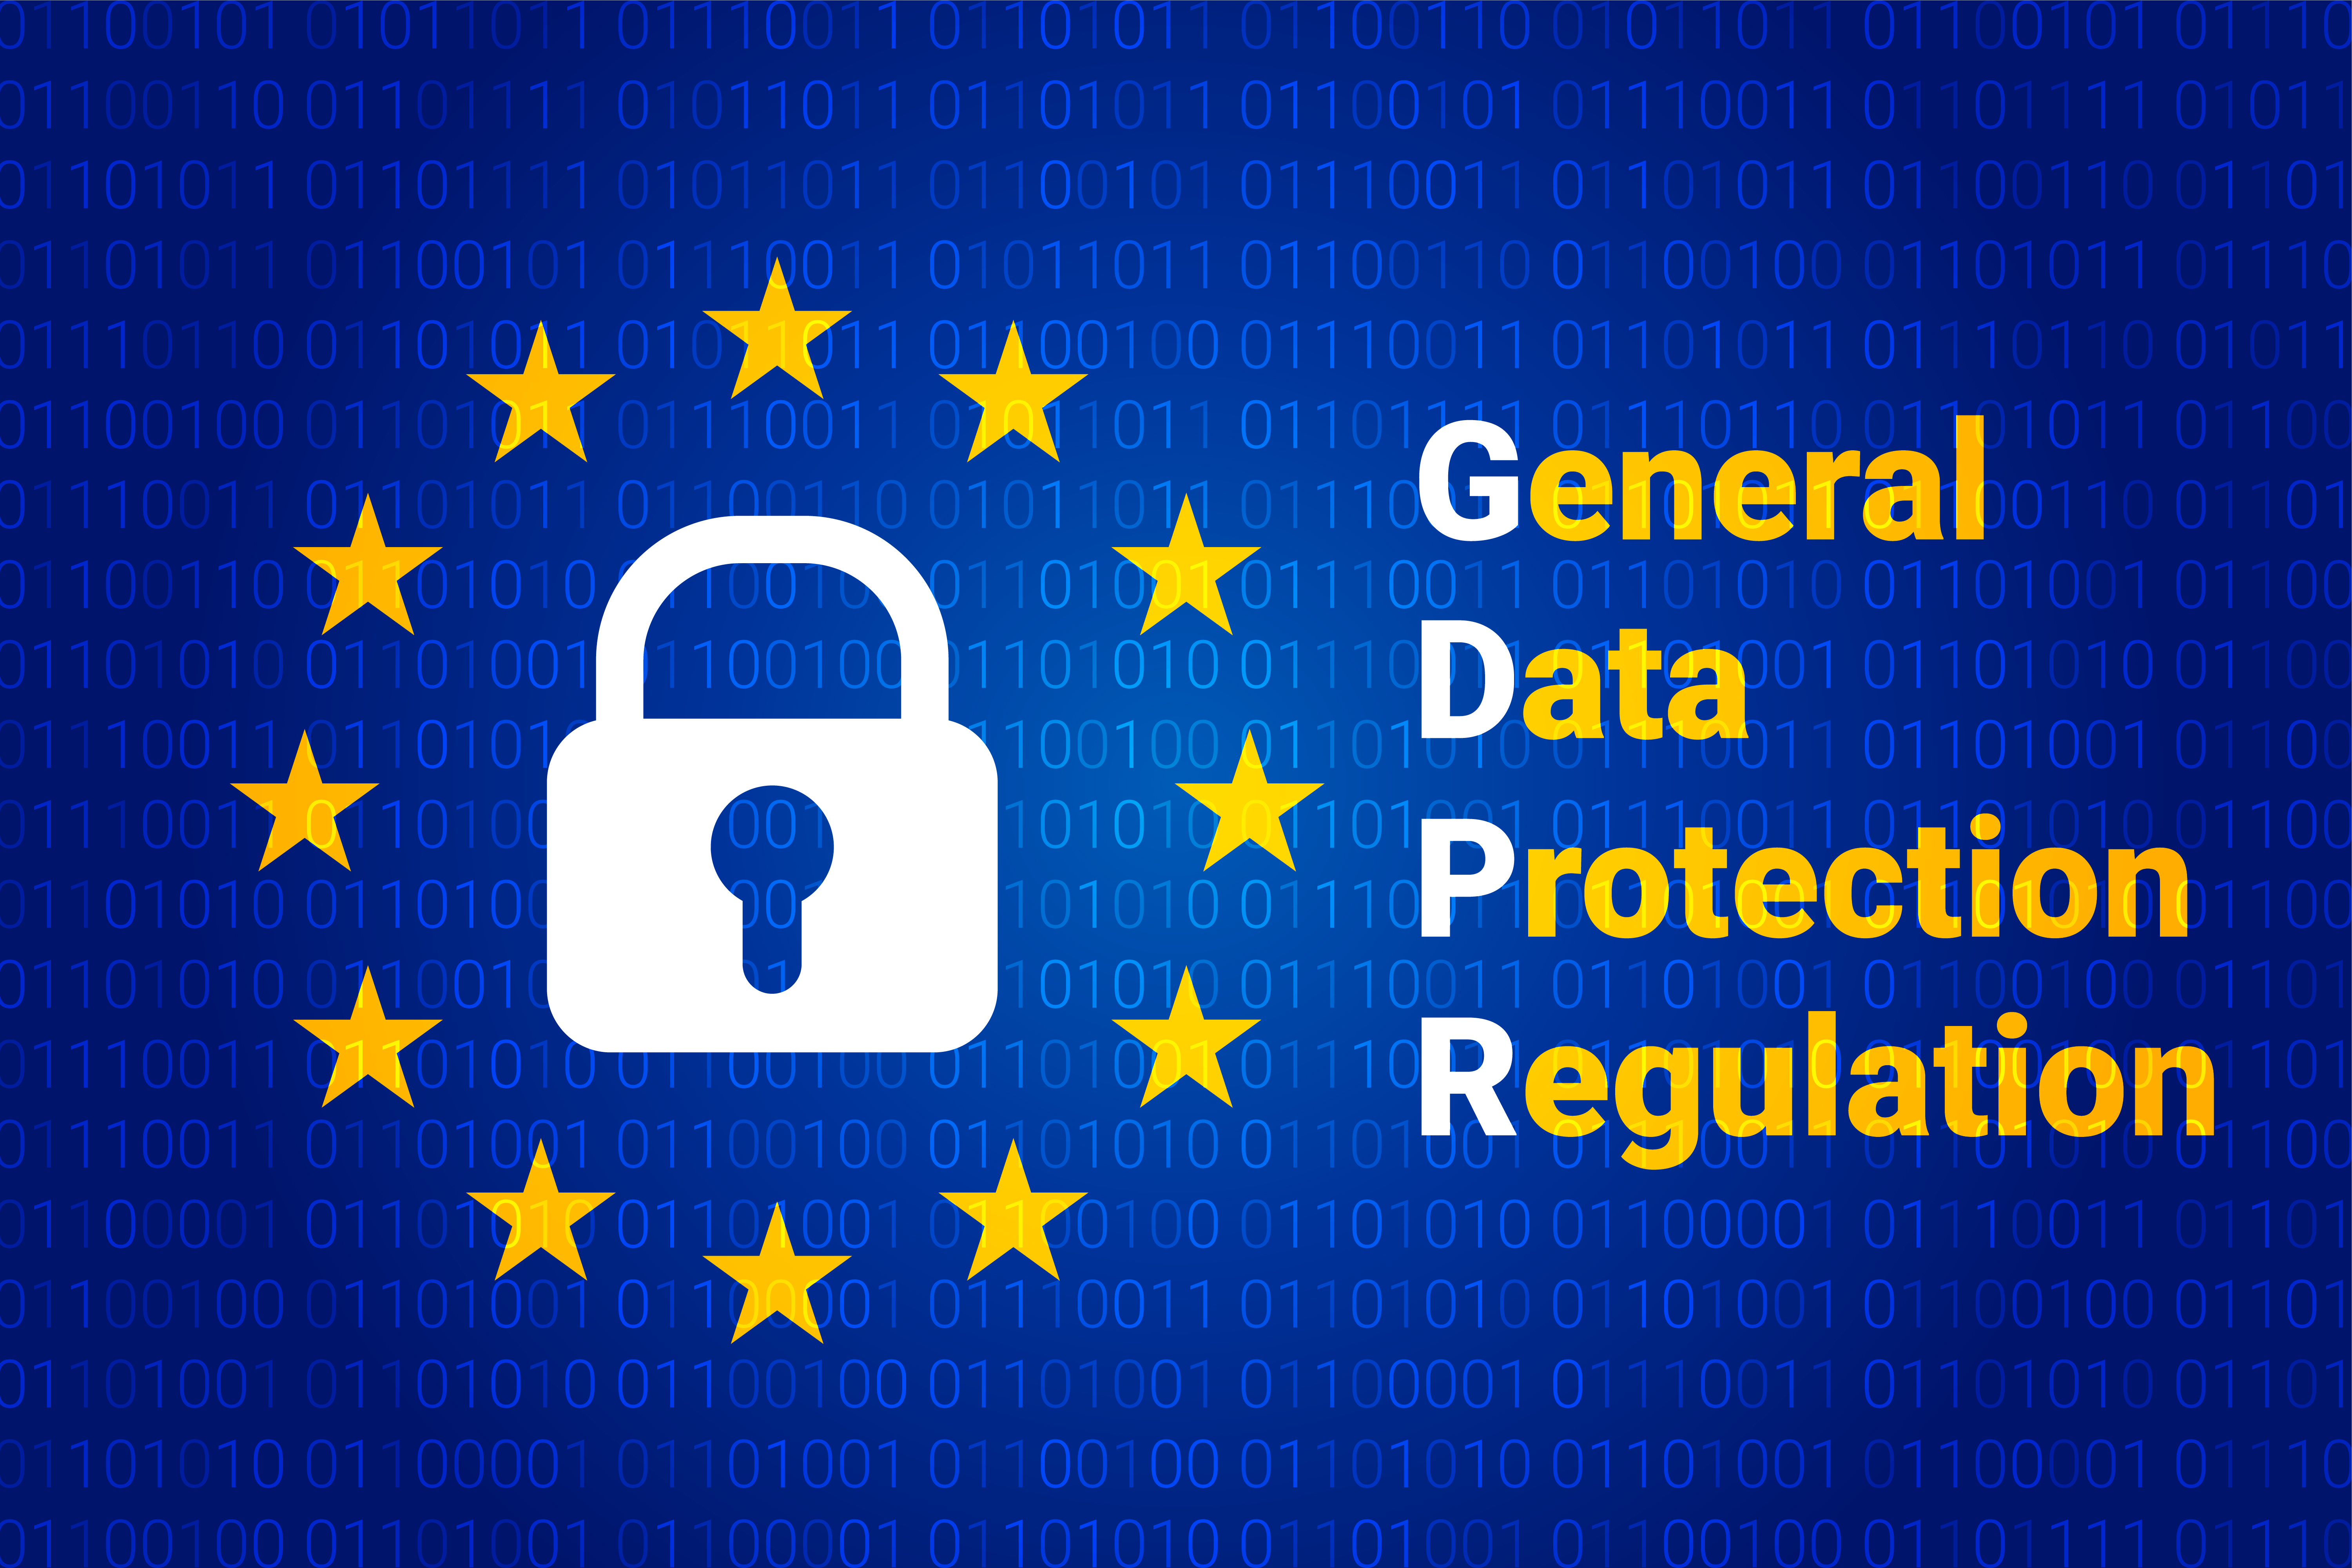 Information in accordance with GDPR